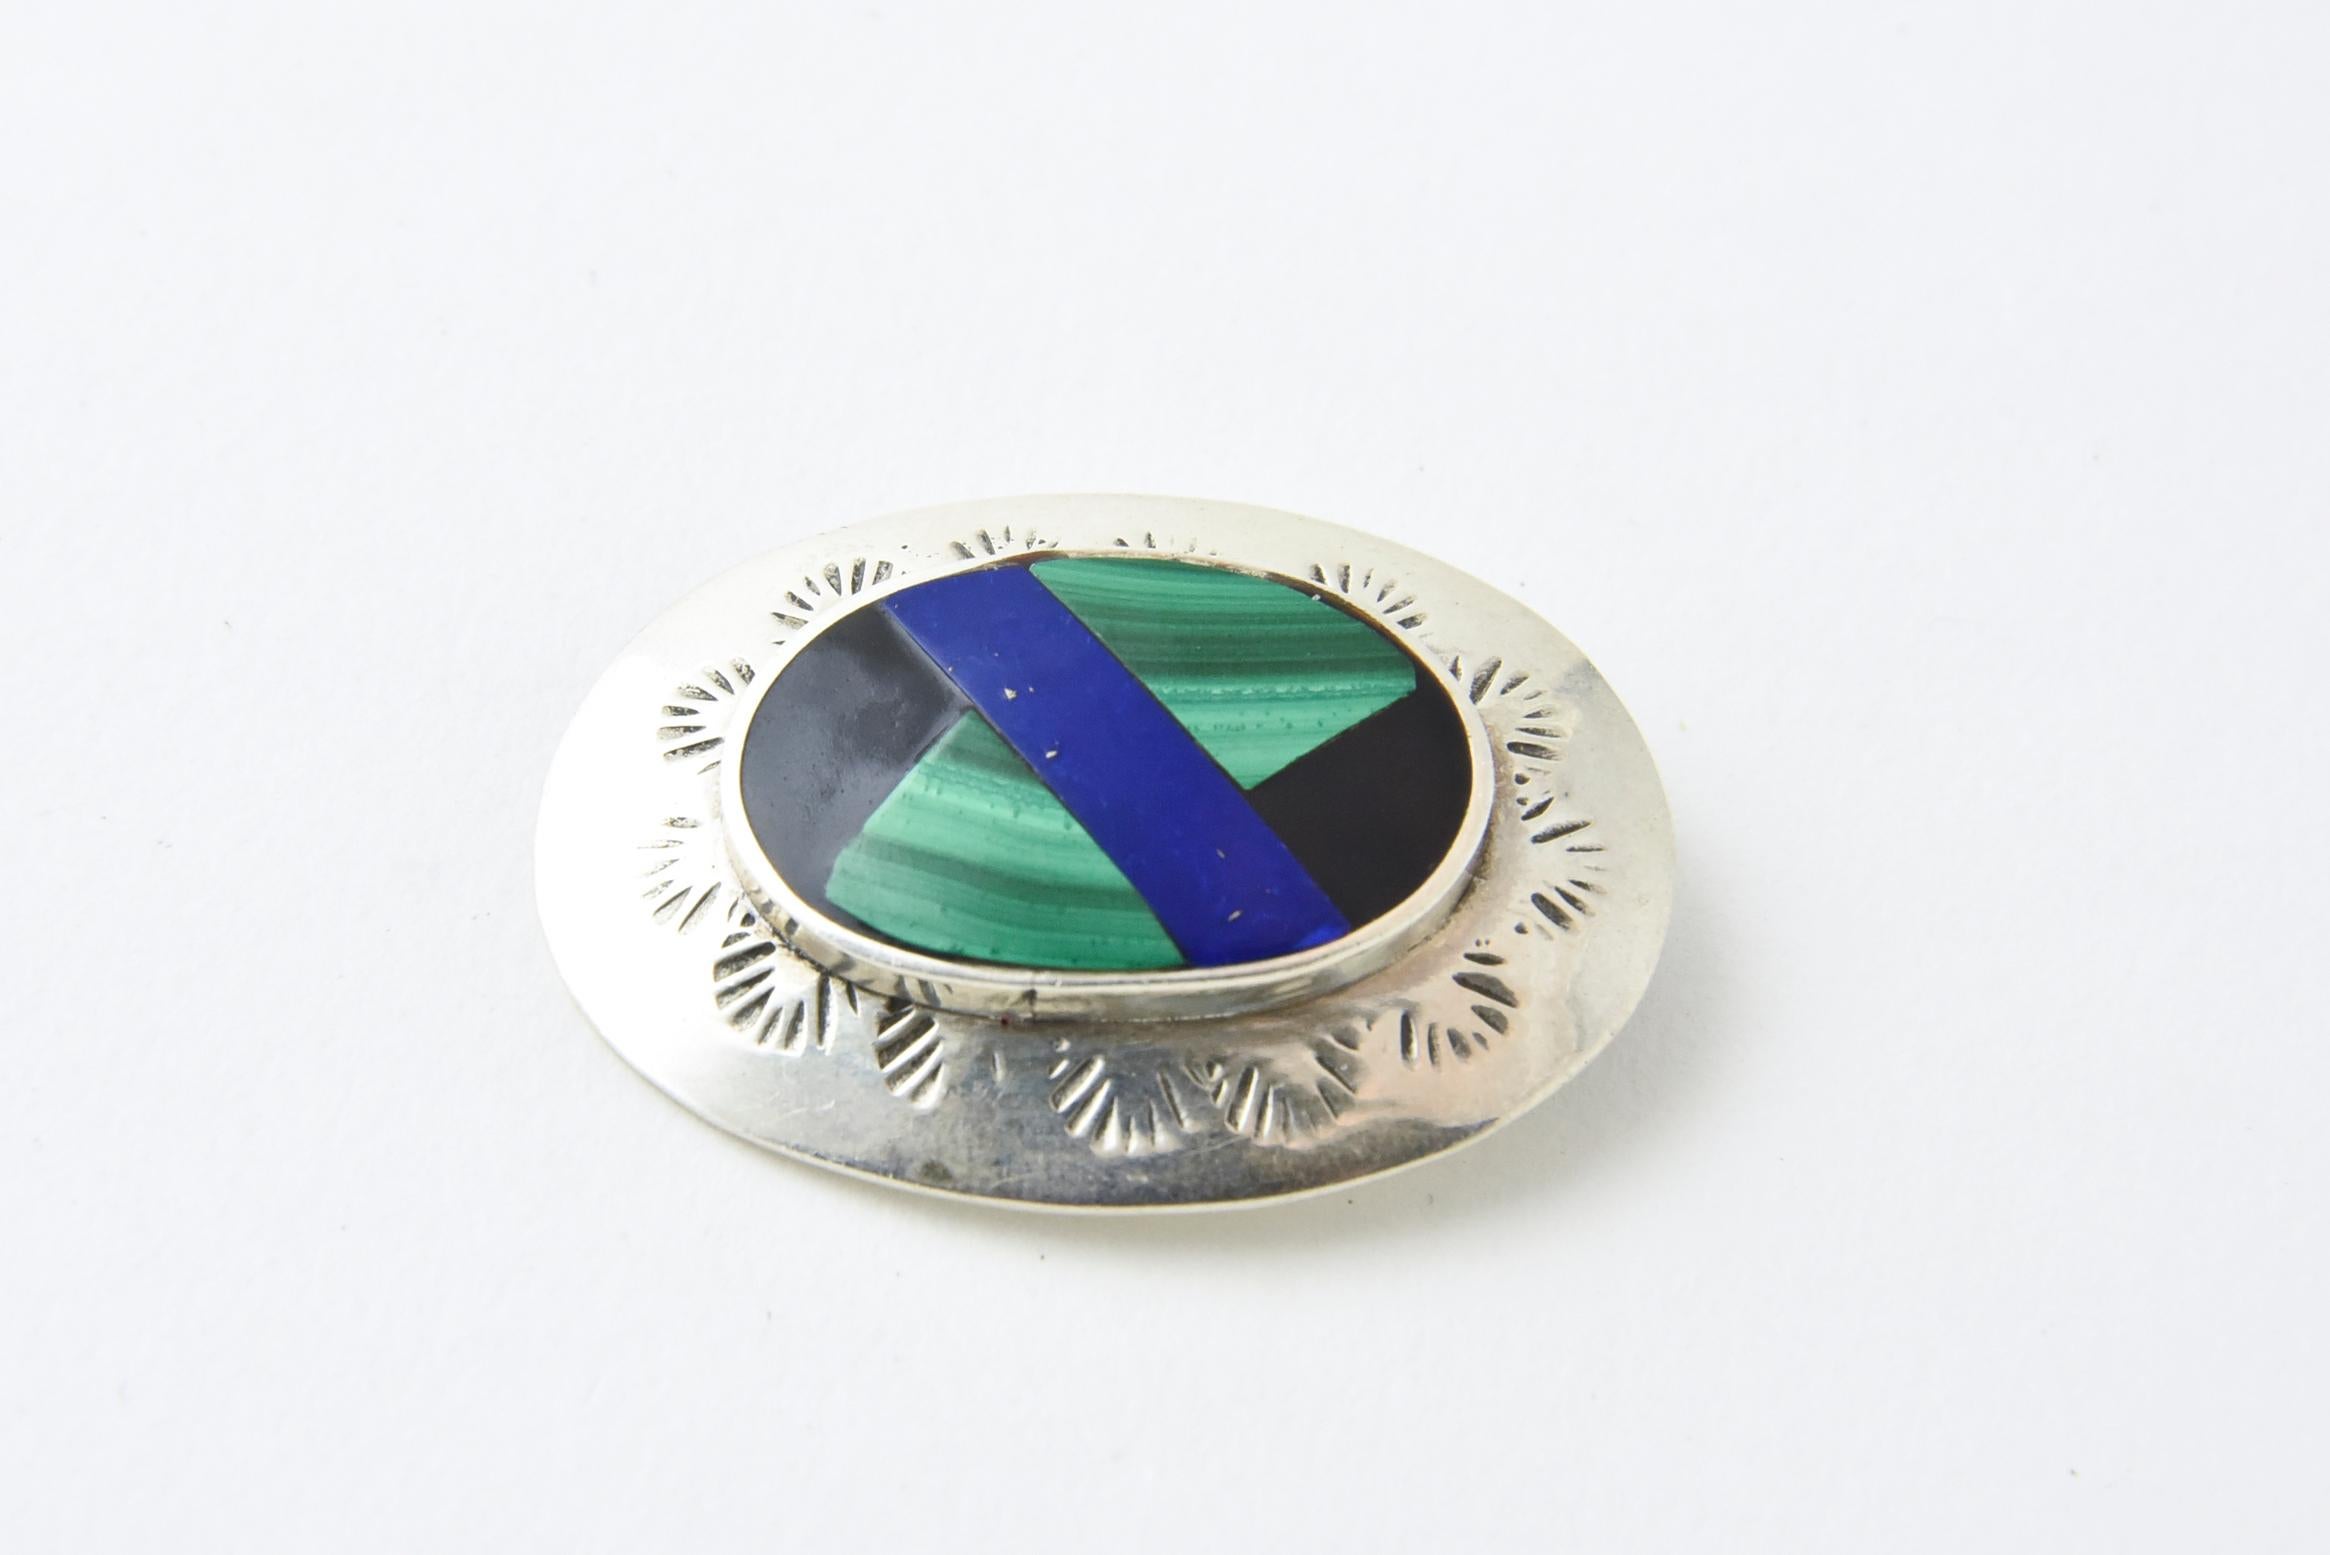 Black onyx, malachite and lapis inlaid into an oval sterling silver brooch. The raised inlaid section is surrounded by a frame with an etched sun design. Marked: Mexico 925.